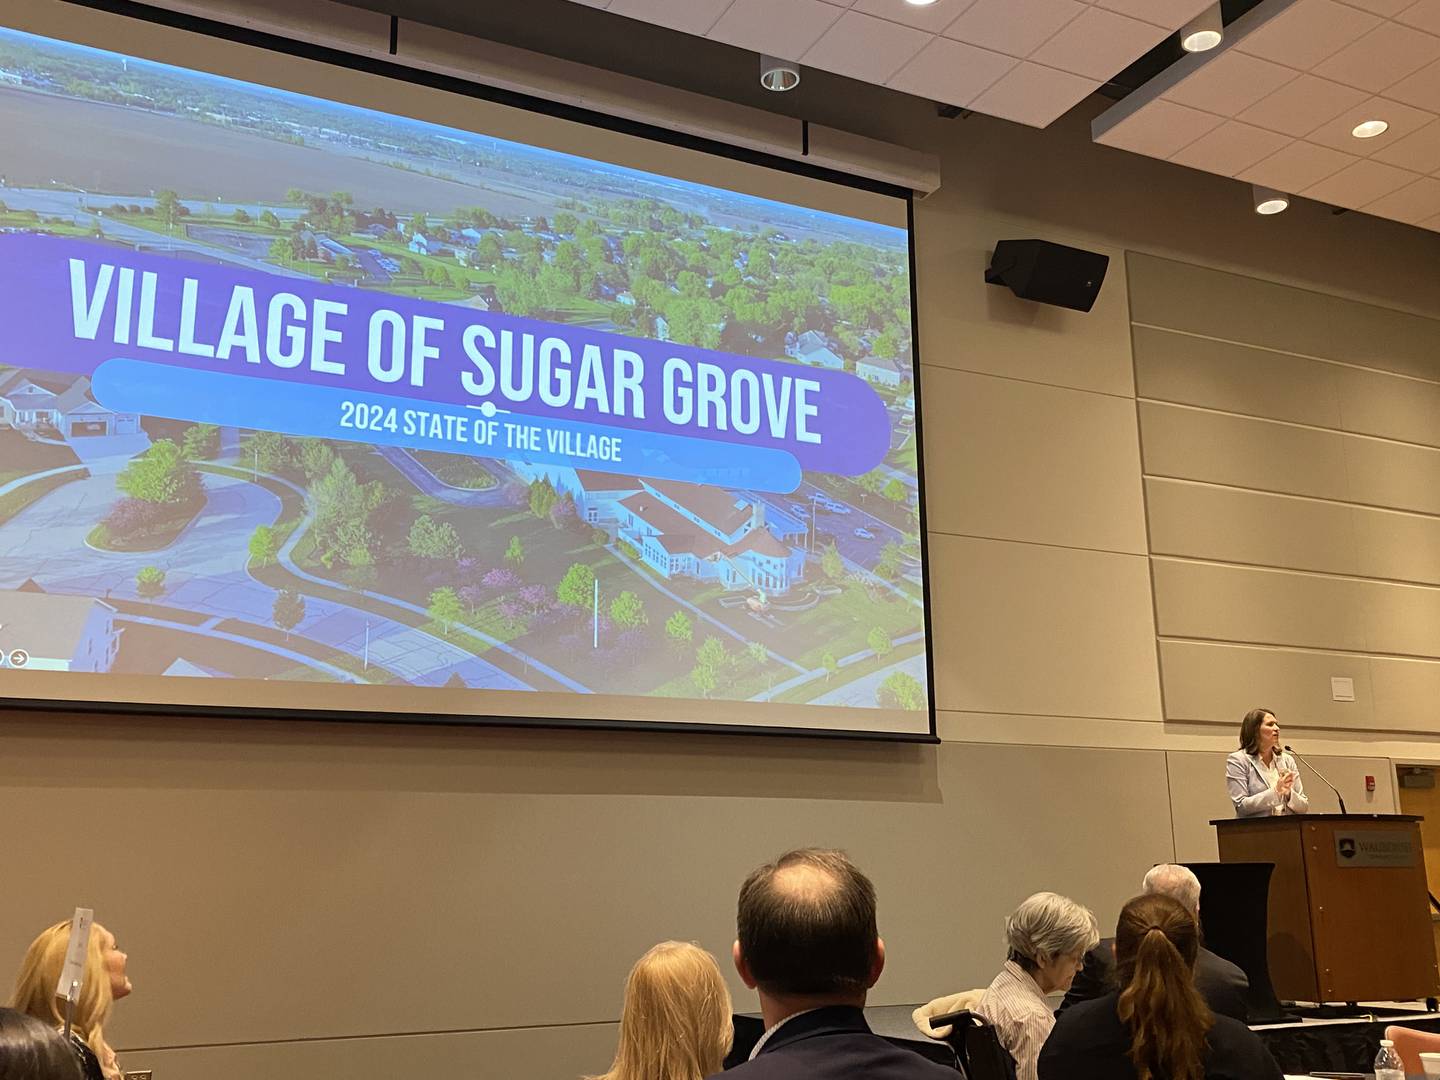 Audience members listen to Village of Sugar Grove President Jen Konen deliver her 2024 State of the Village at Waubonsee Community College on March 20.